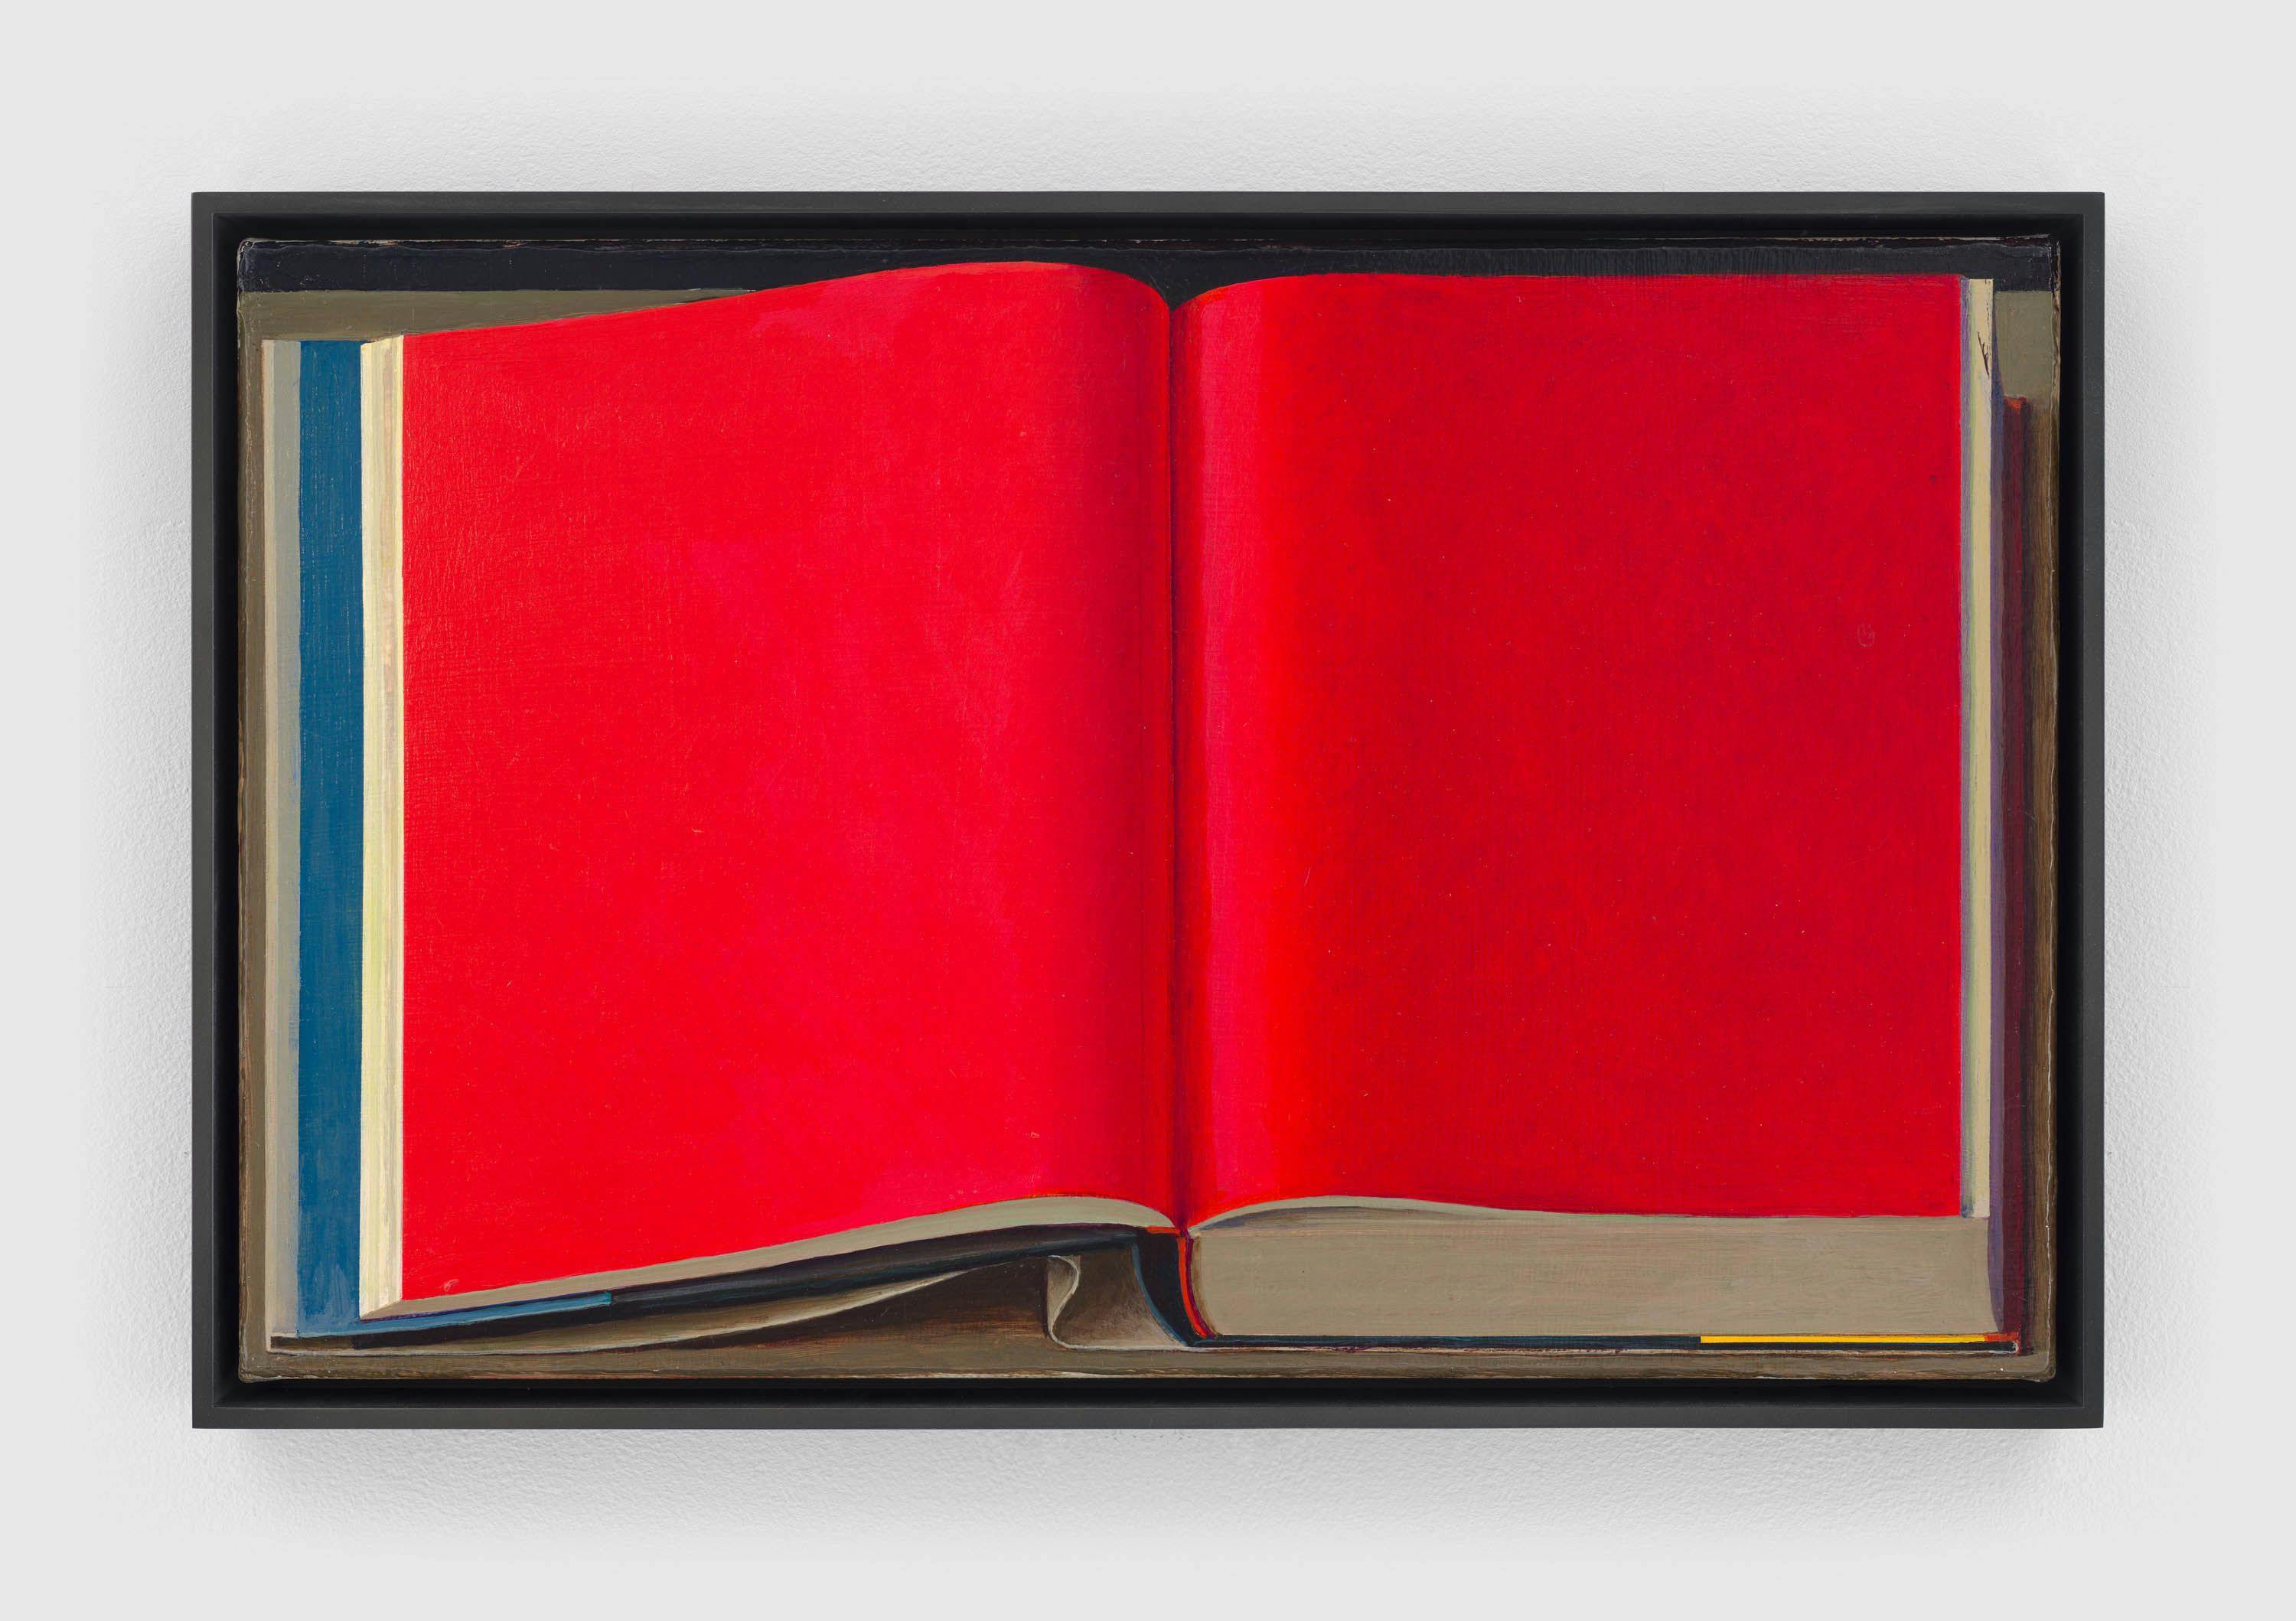 A painting by Liu Ye, titled Book Painting No. 6, 2014 to 2015.